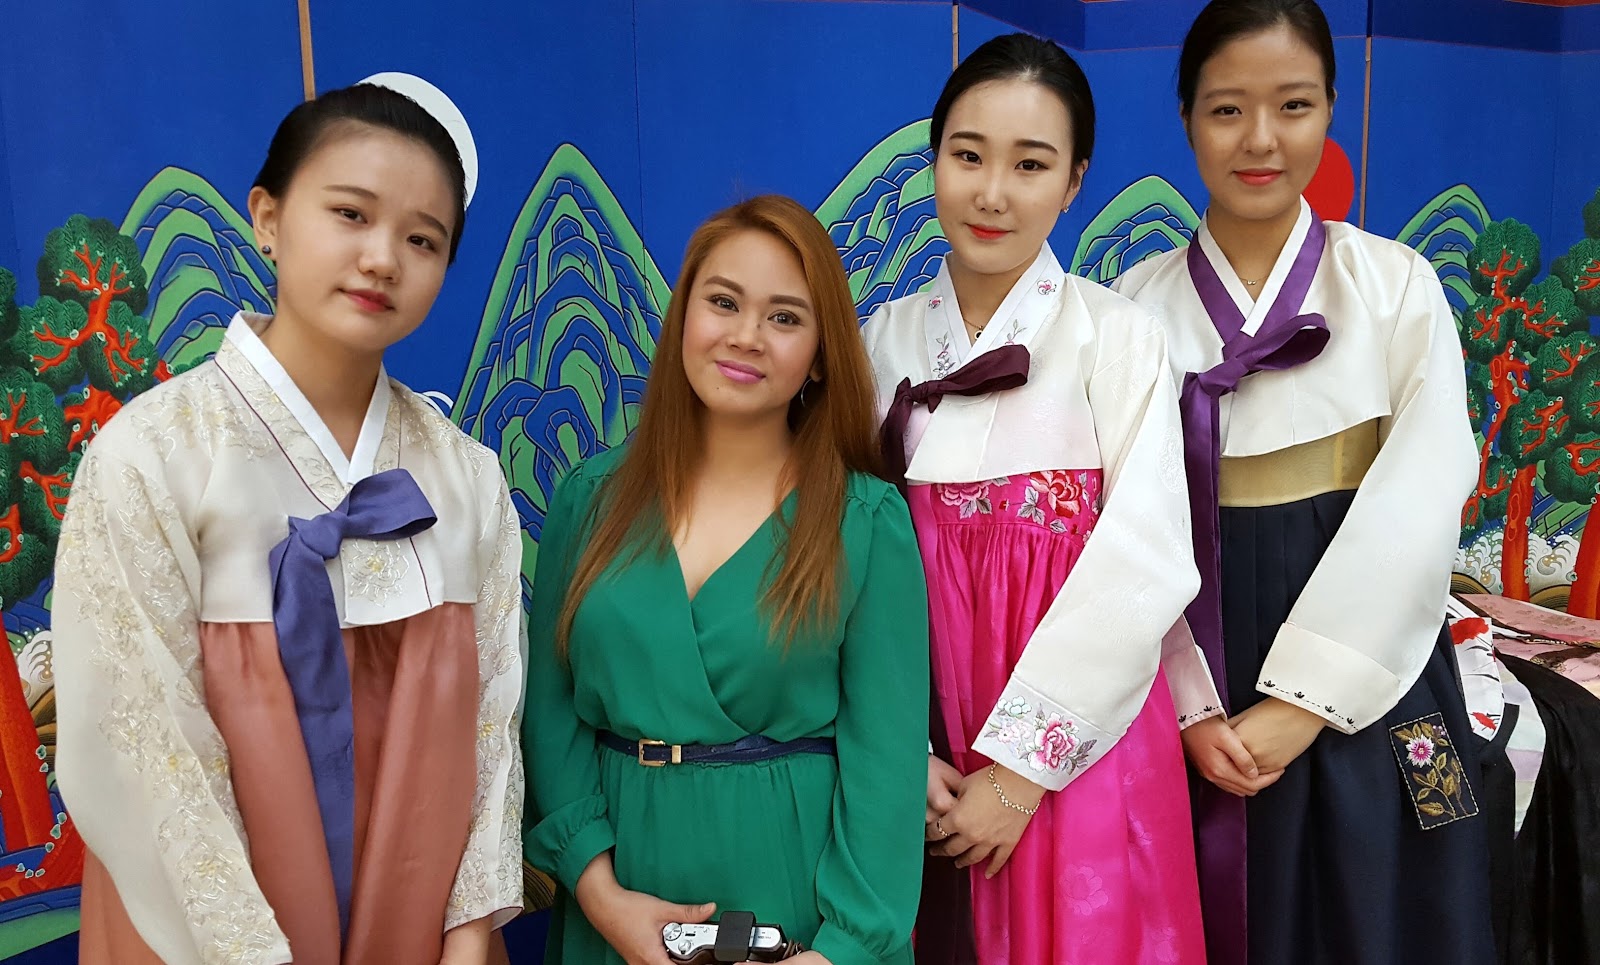 Han Style Traditional Korean Cooking and Hanbok Experience in